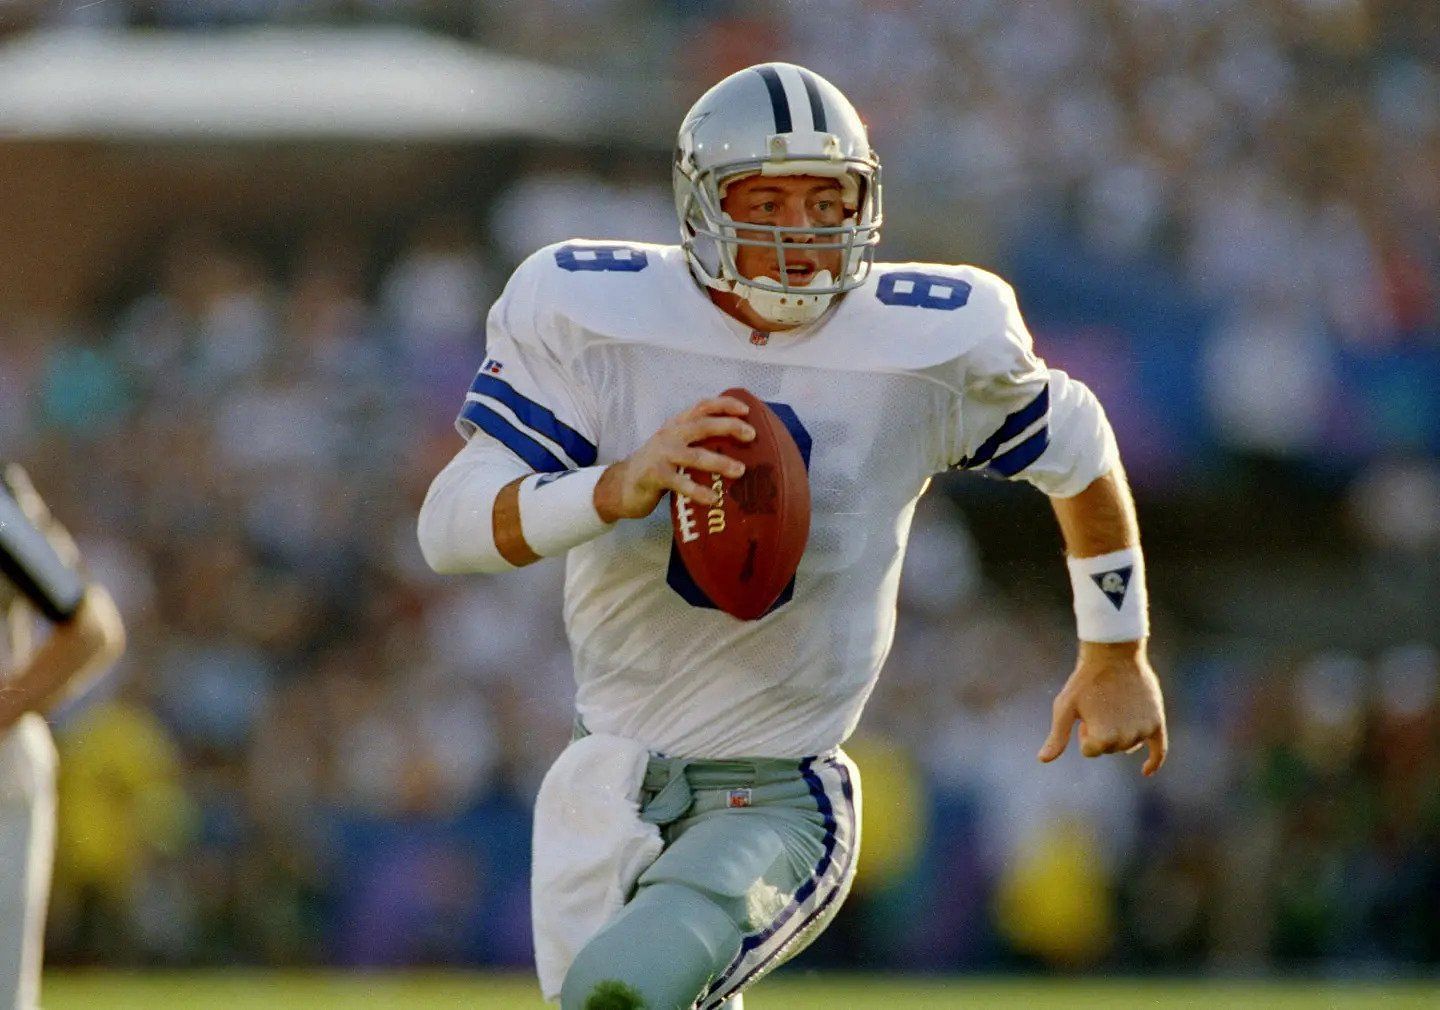 Troy Aikman mesmerized the nation as the Cowboys quarterback in the 90s